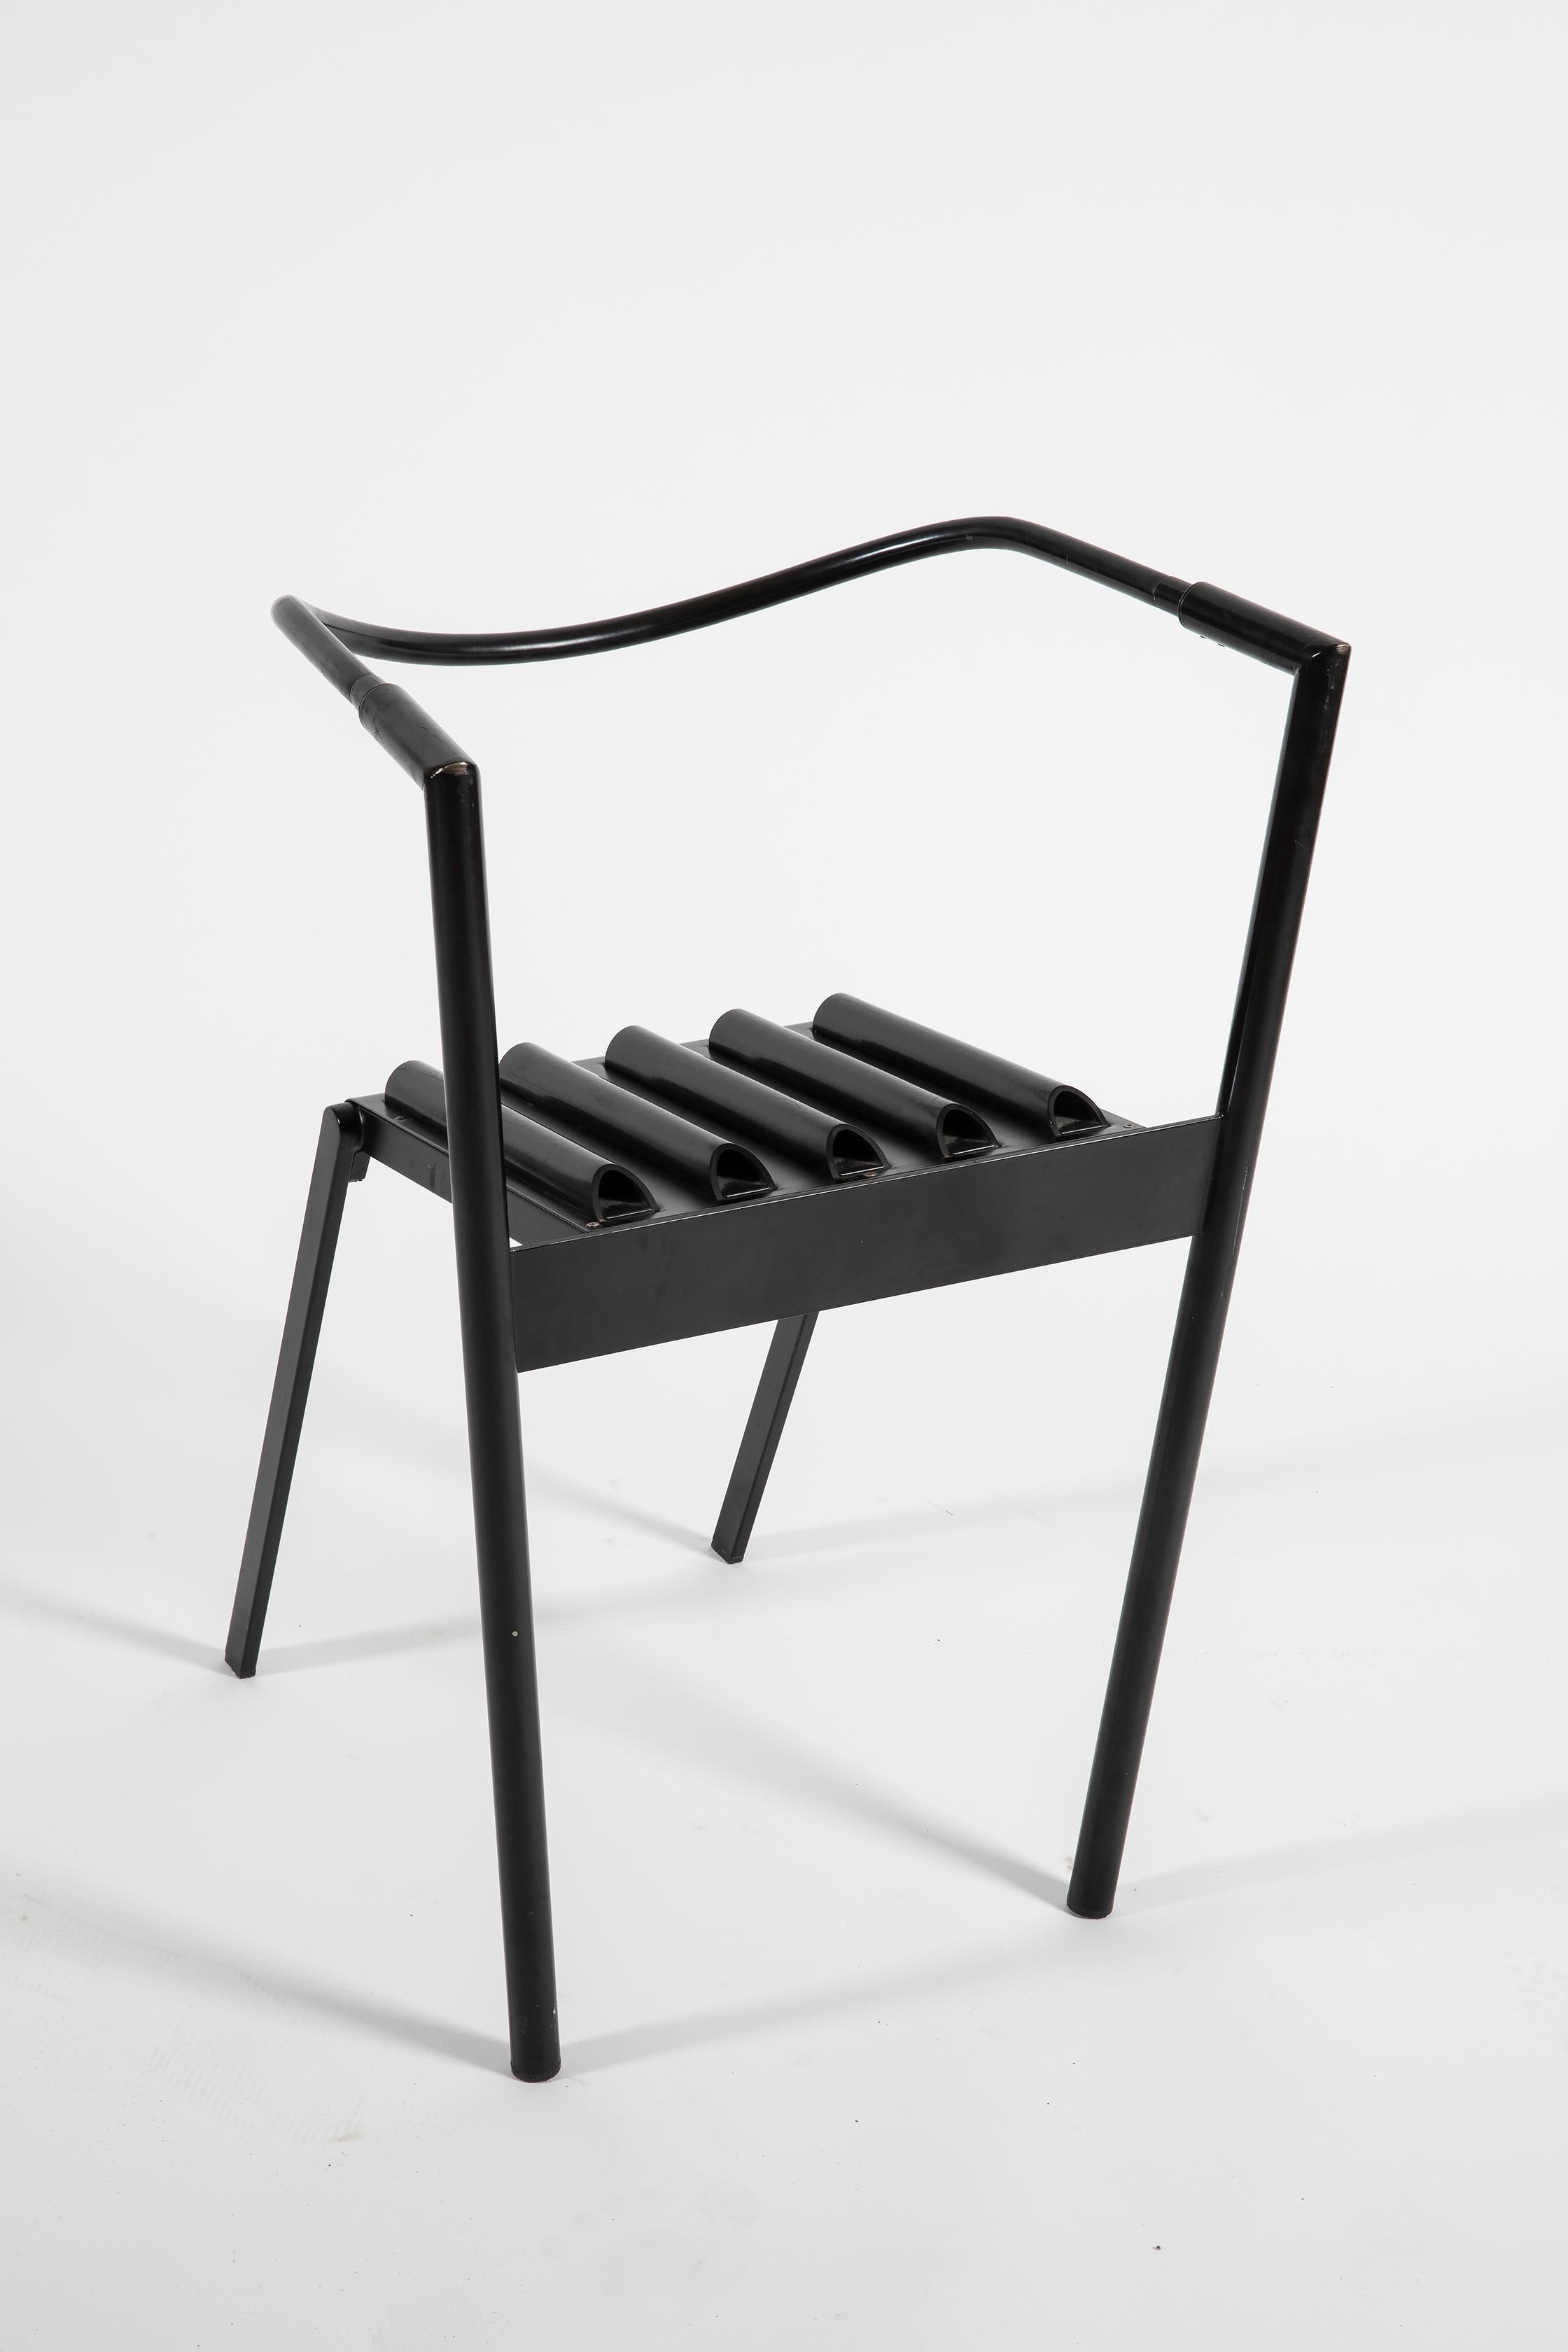 Very rare set of 2 Hans e Alice chairs by Paolo Pallucco and Mireille Rivier in black lacquered steel and rubber. Produced in 1986 by Pallucco.
Paolo Pallucco and Mireille Rivier, architects able to leave a precise sign of their passage. In the